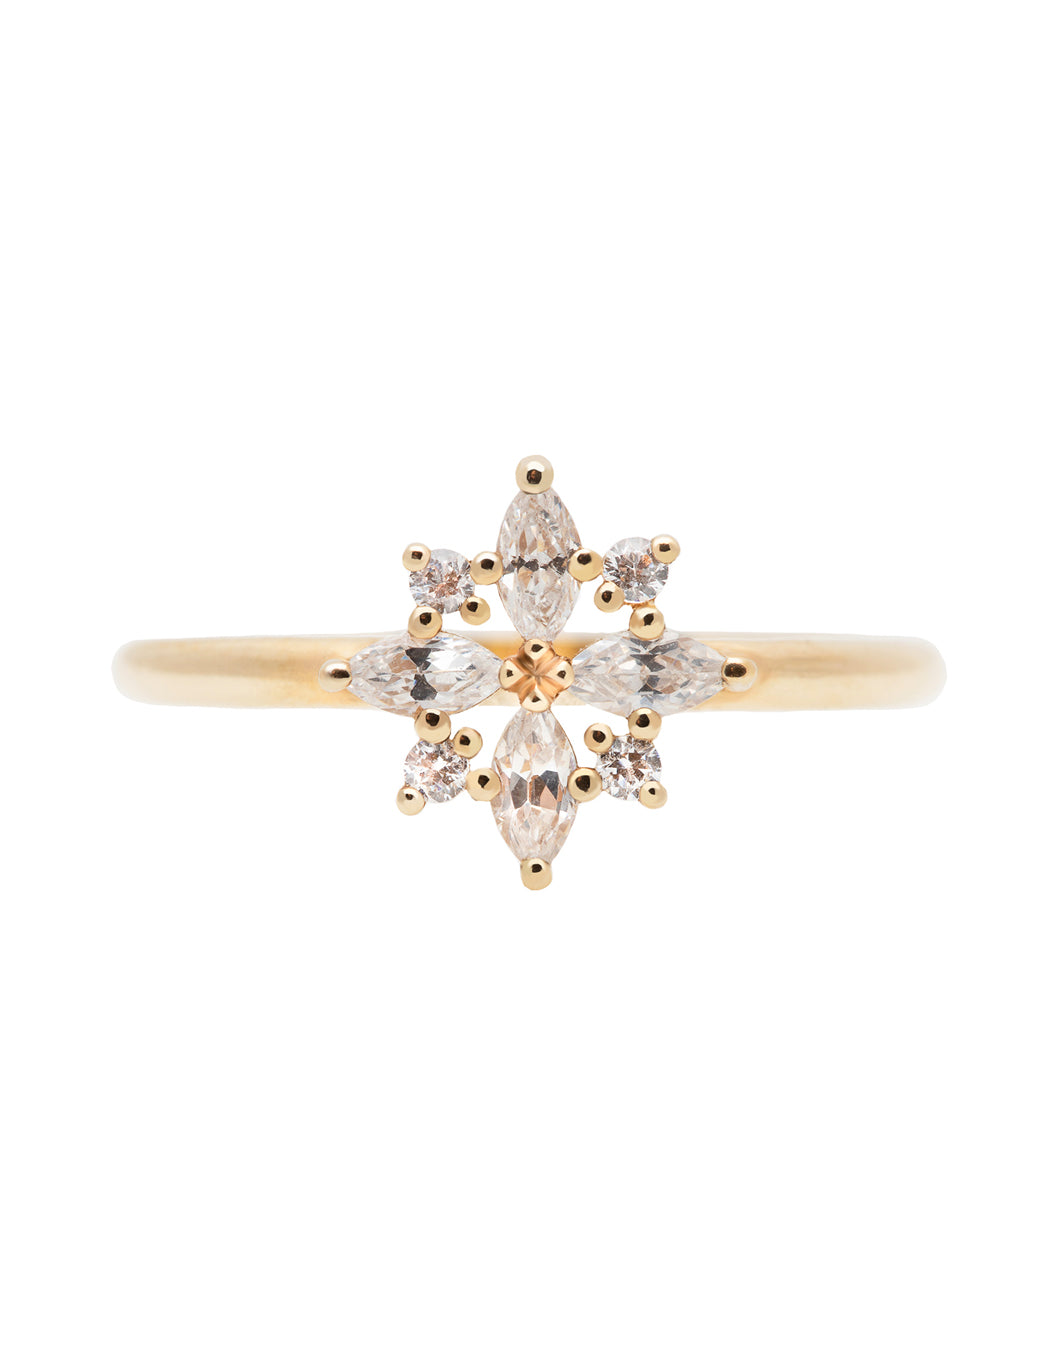 A delicate 14k yellow gold engagement ring set with four marquise cut white diamonds, and four brilliant cut white diamonds, in a shape of a snowflake.